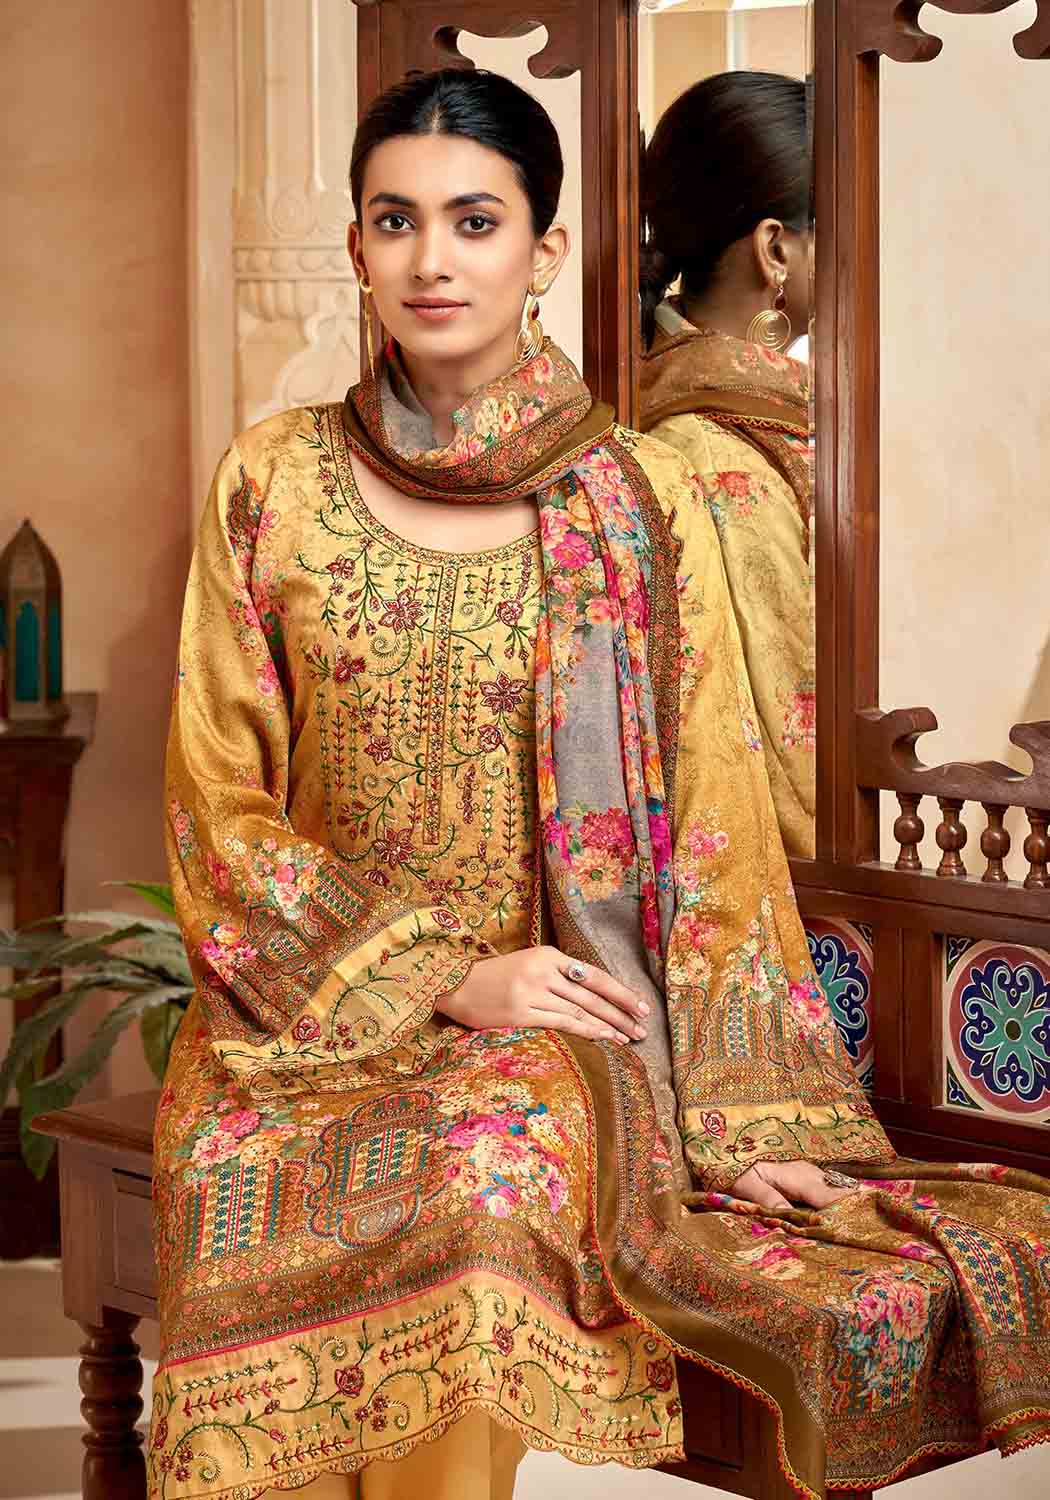 Unstitched Pakistani Print Cotton Suit Material with Embroidery Yellow